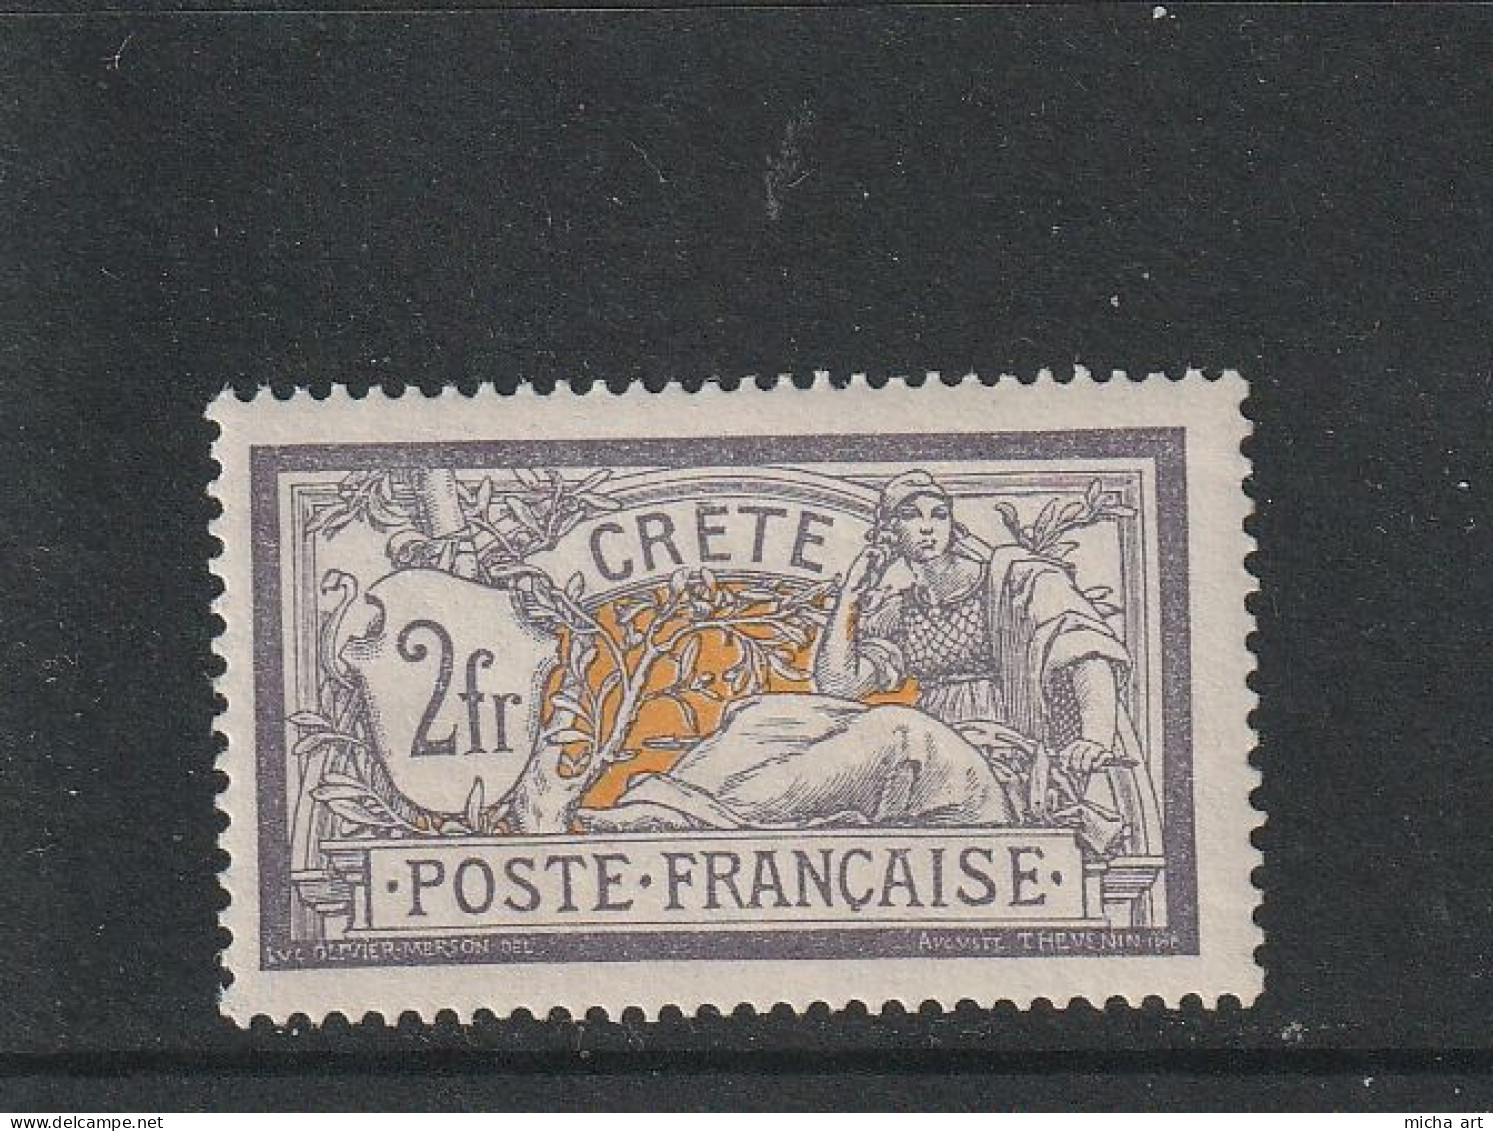 Greece Crete French Post Office 1902 - 1913 Crete Issue 2 Fr. MNH W1105 - Unused Stamps